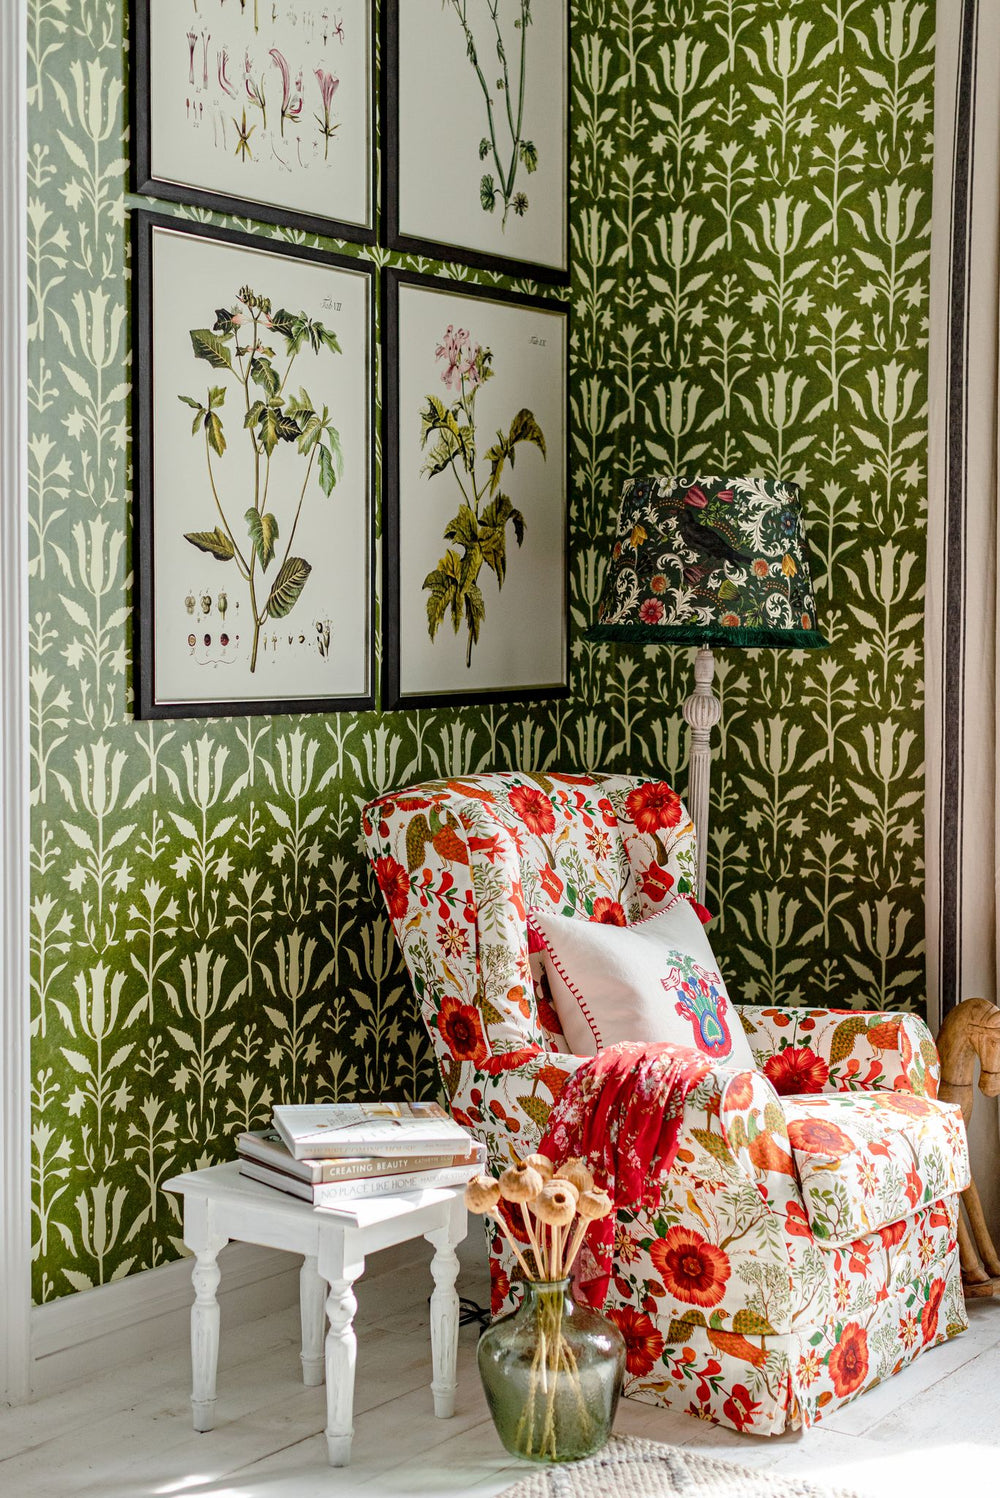 green-tulip-floral-wallpaper-floral-pictures-armchair-red-flowers-folk-scenery